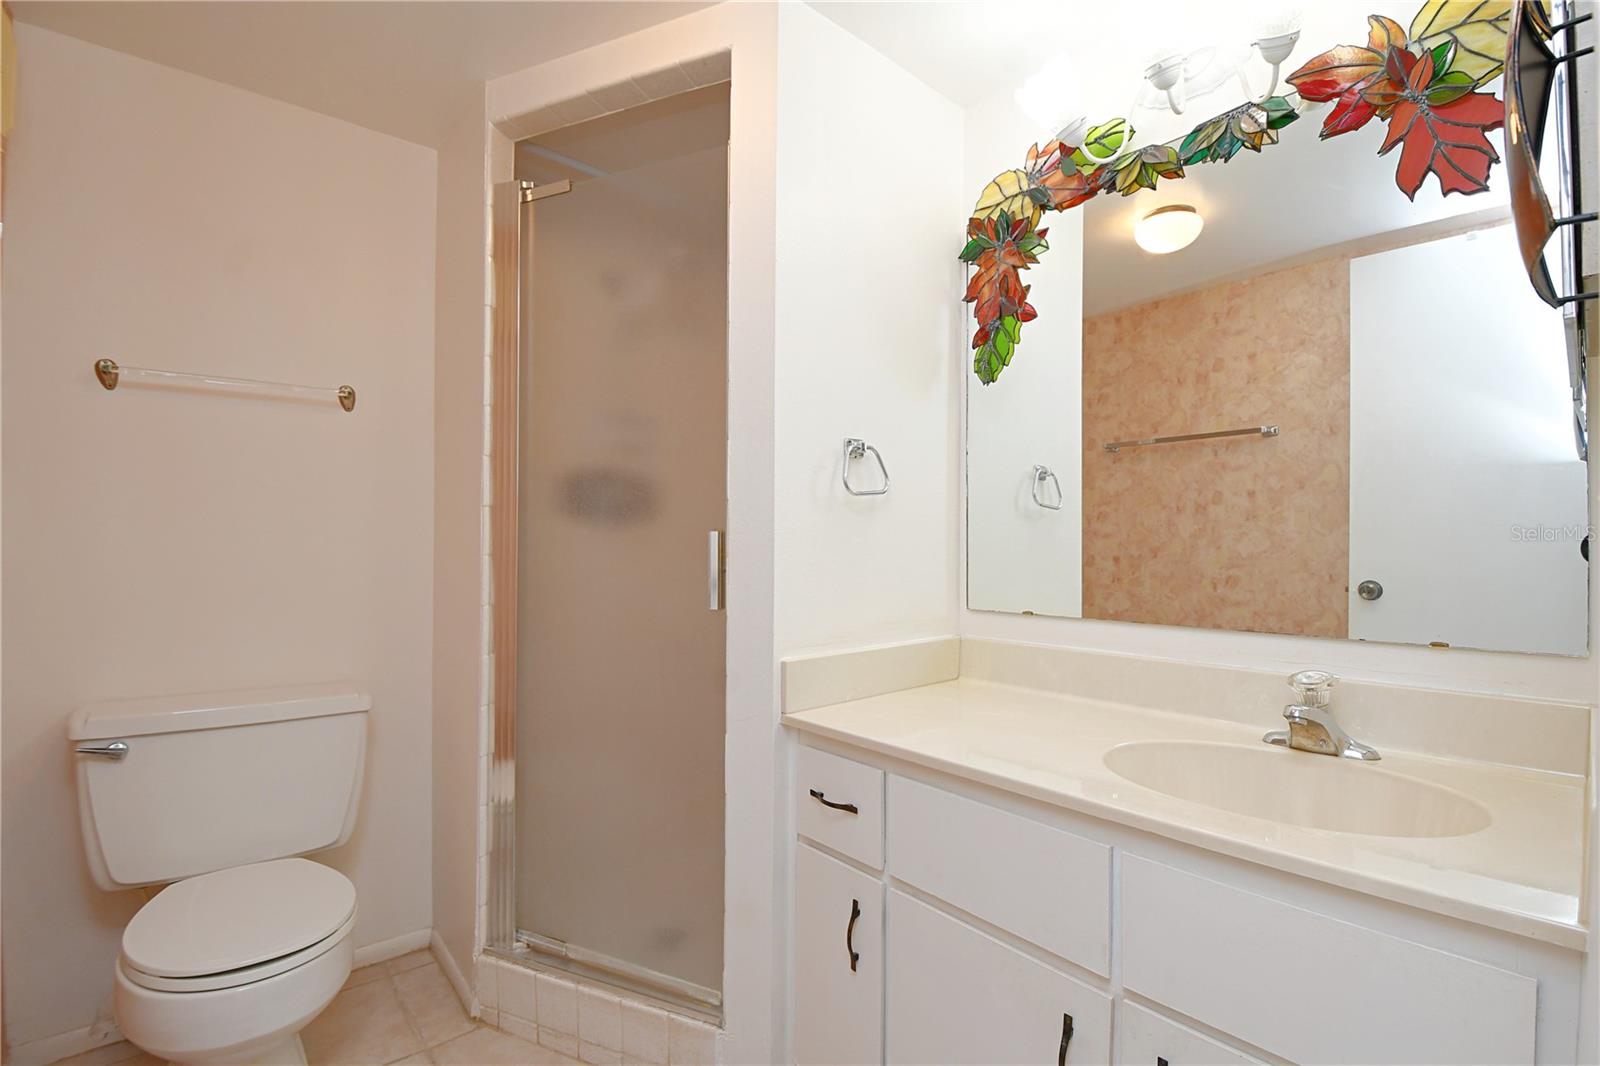 The second bathroom comes with corner stand-up shower and a vanity with a large mirror and a medicine cabinet.